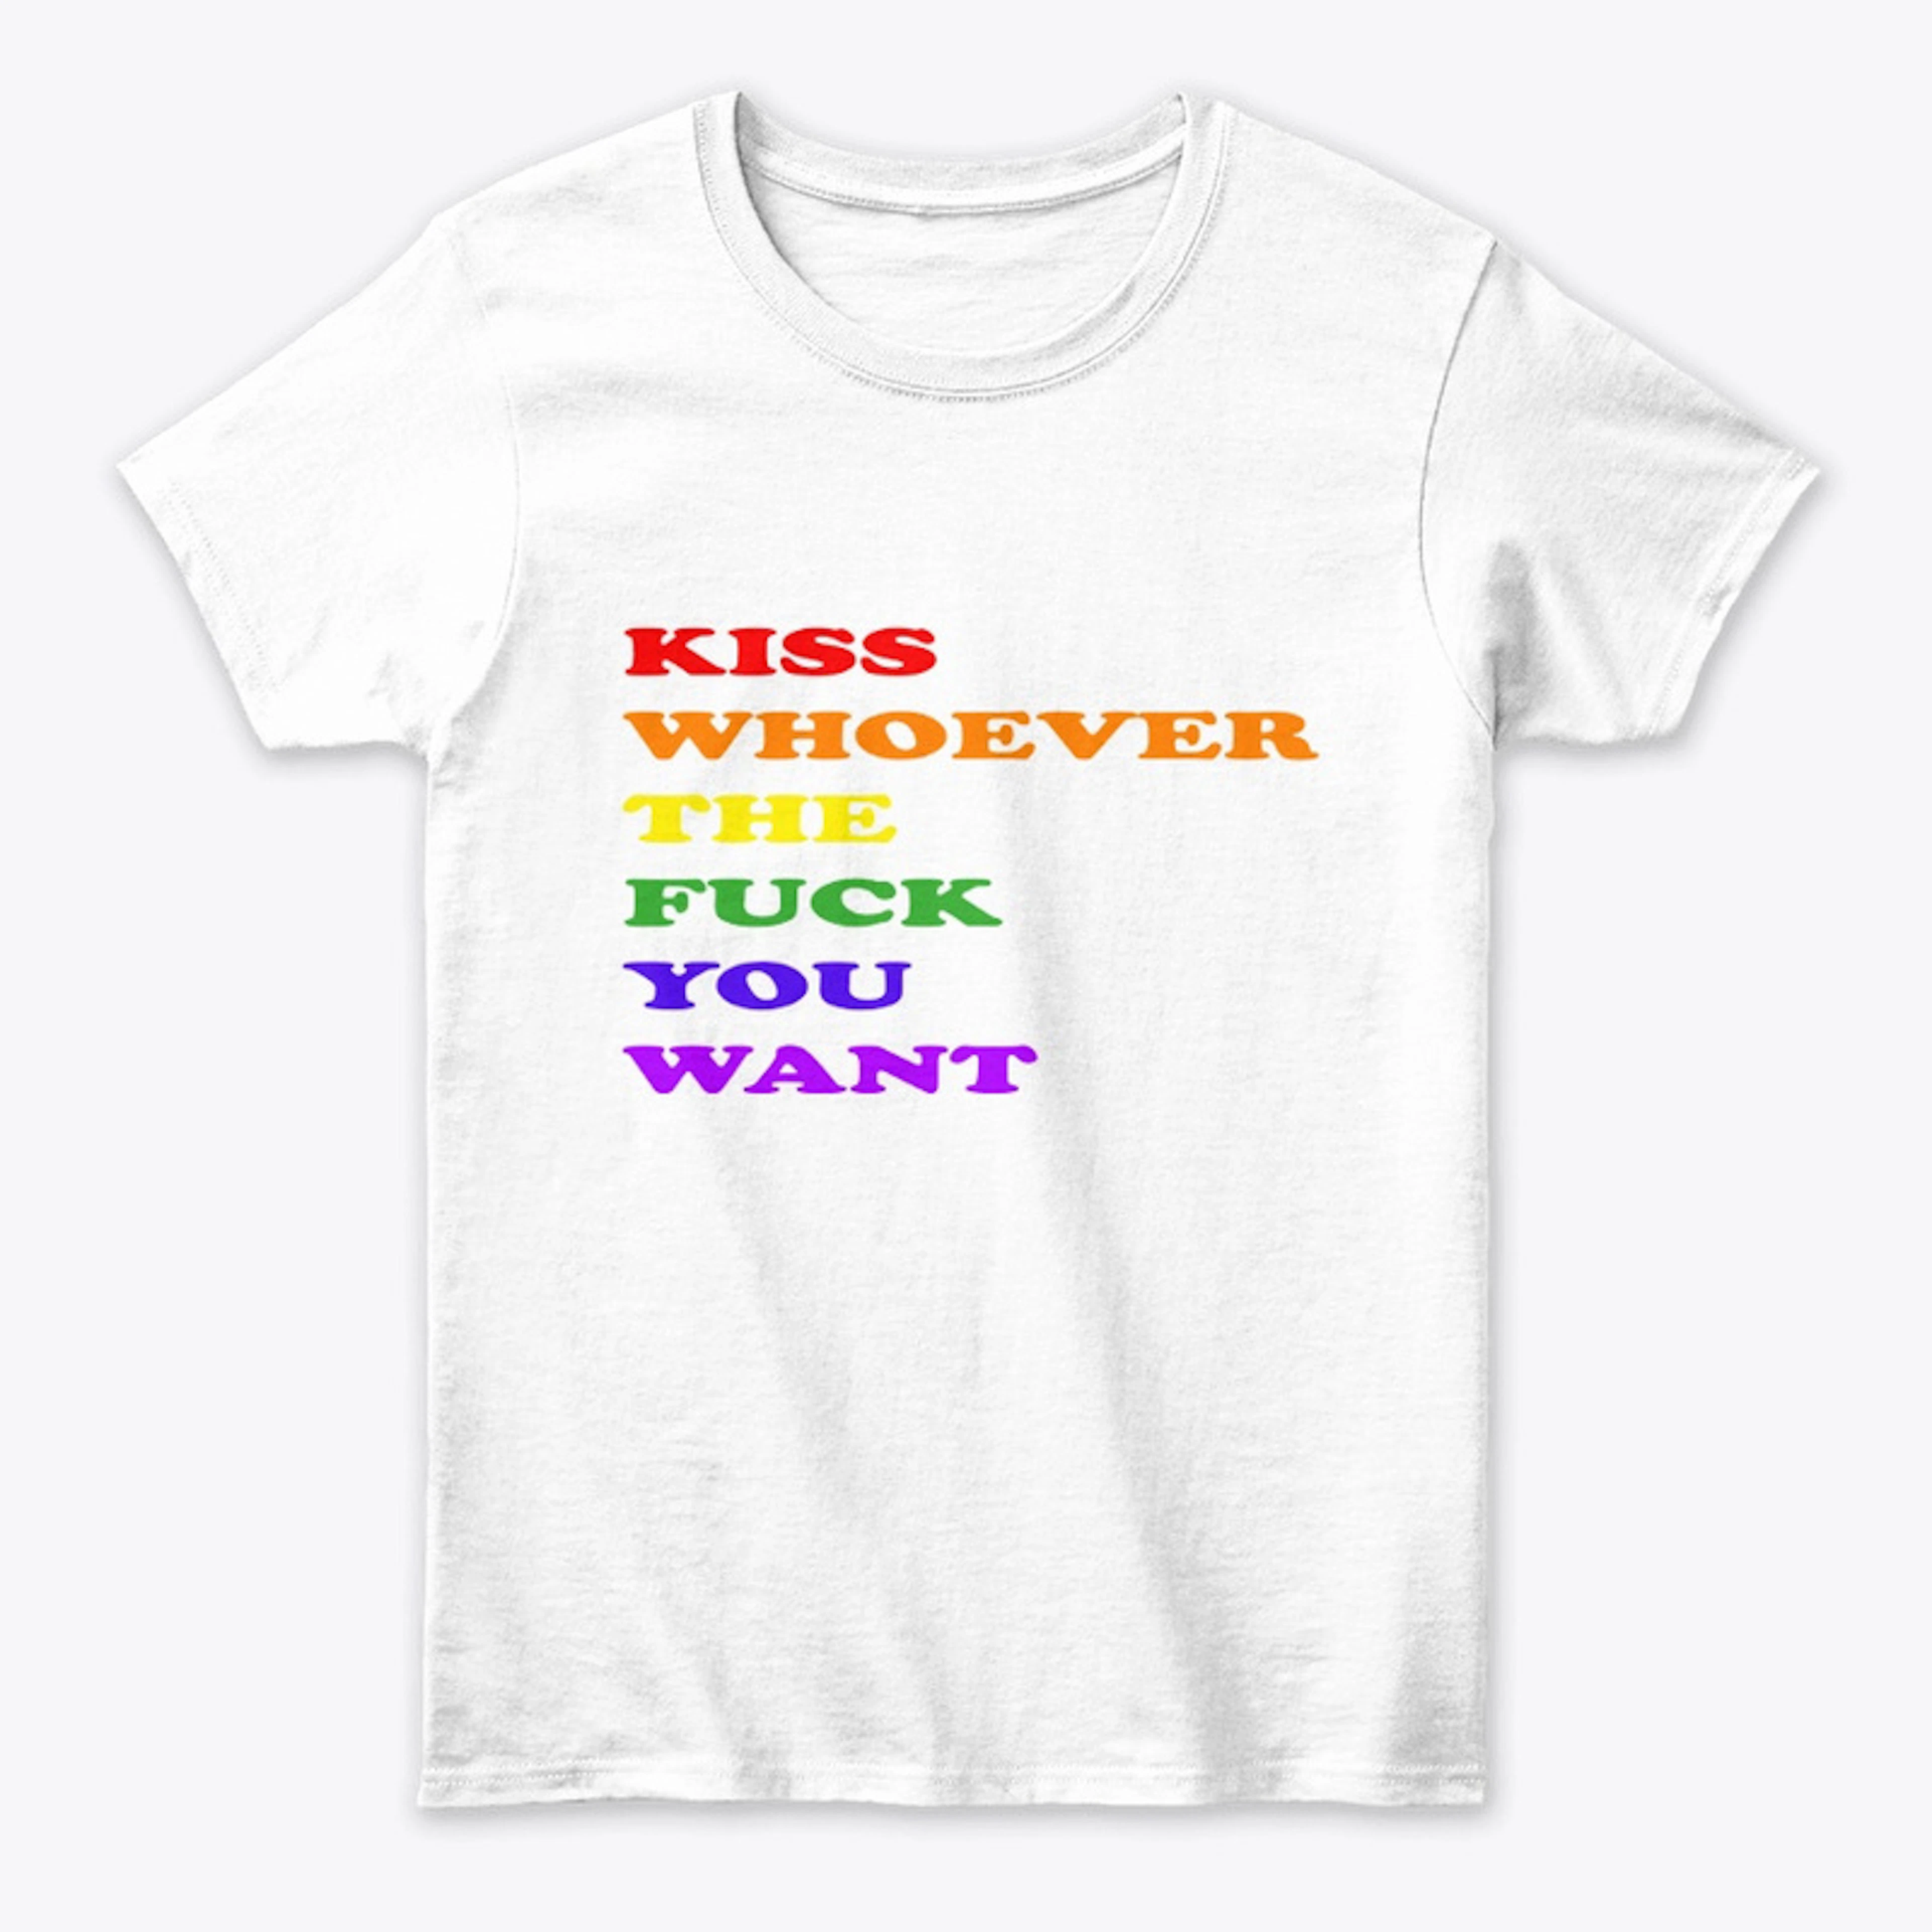 KISS WHOEVER YOU WANT! Apparel